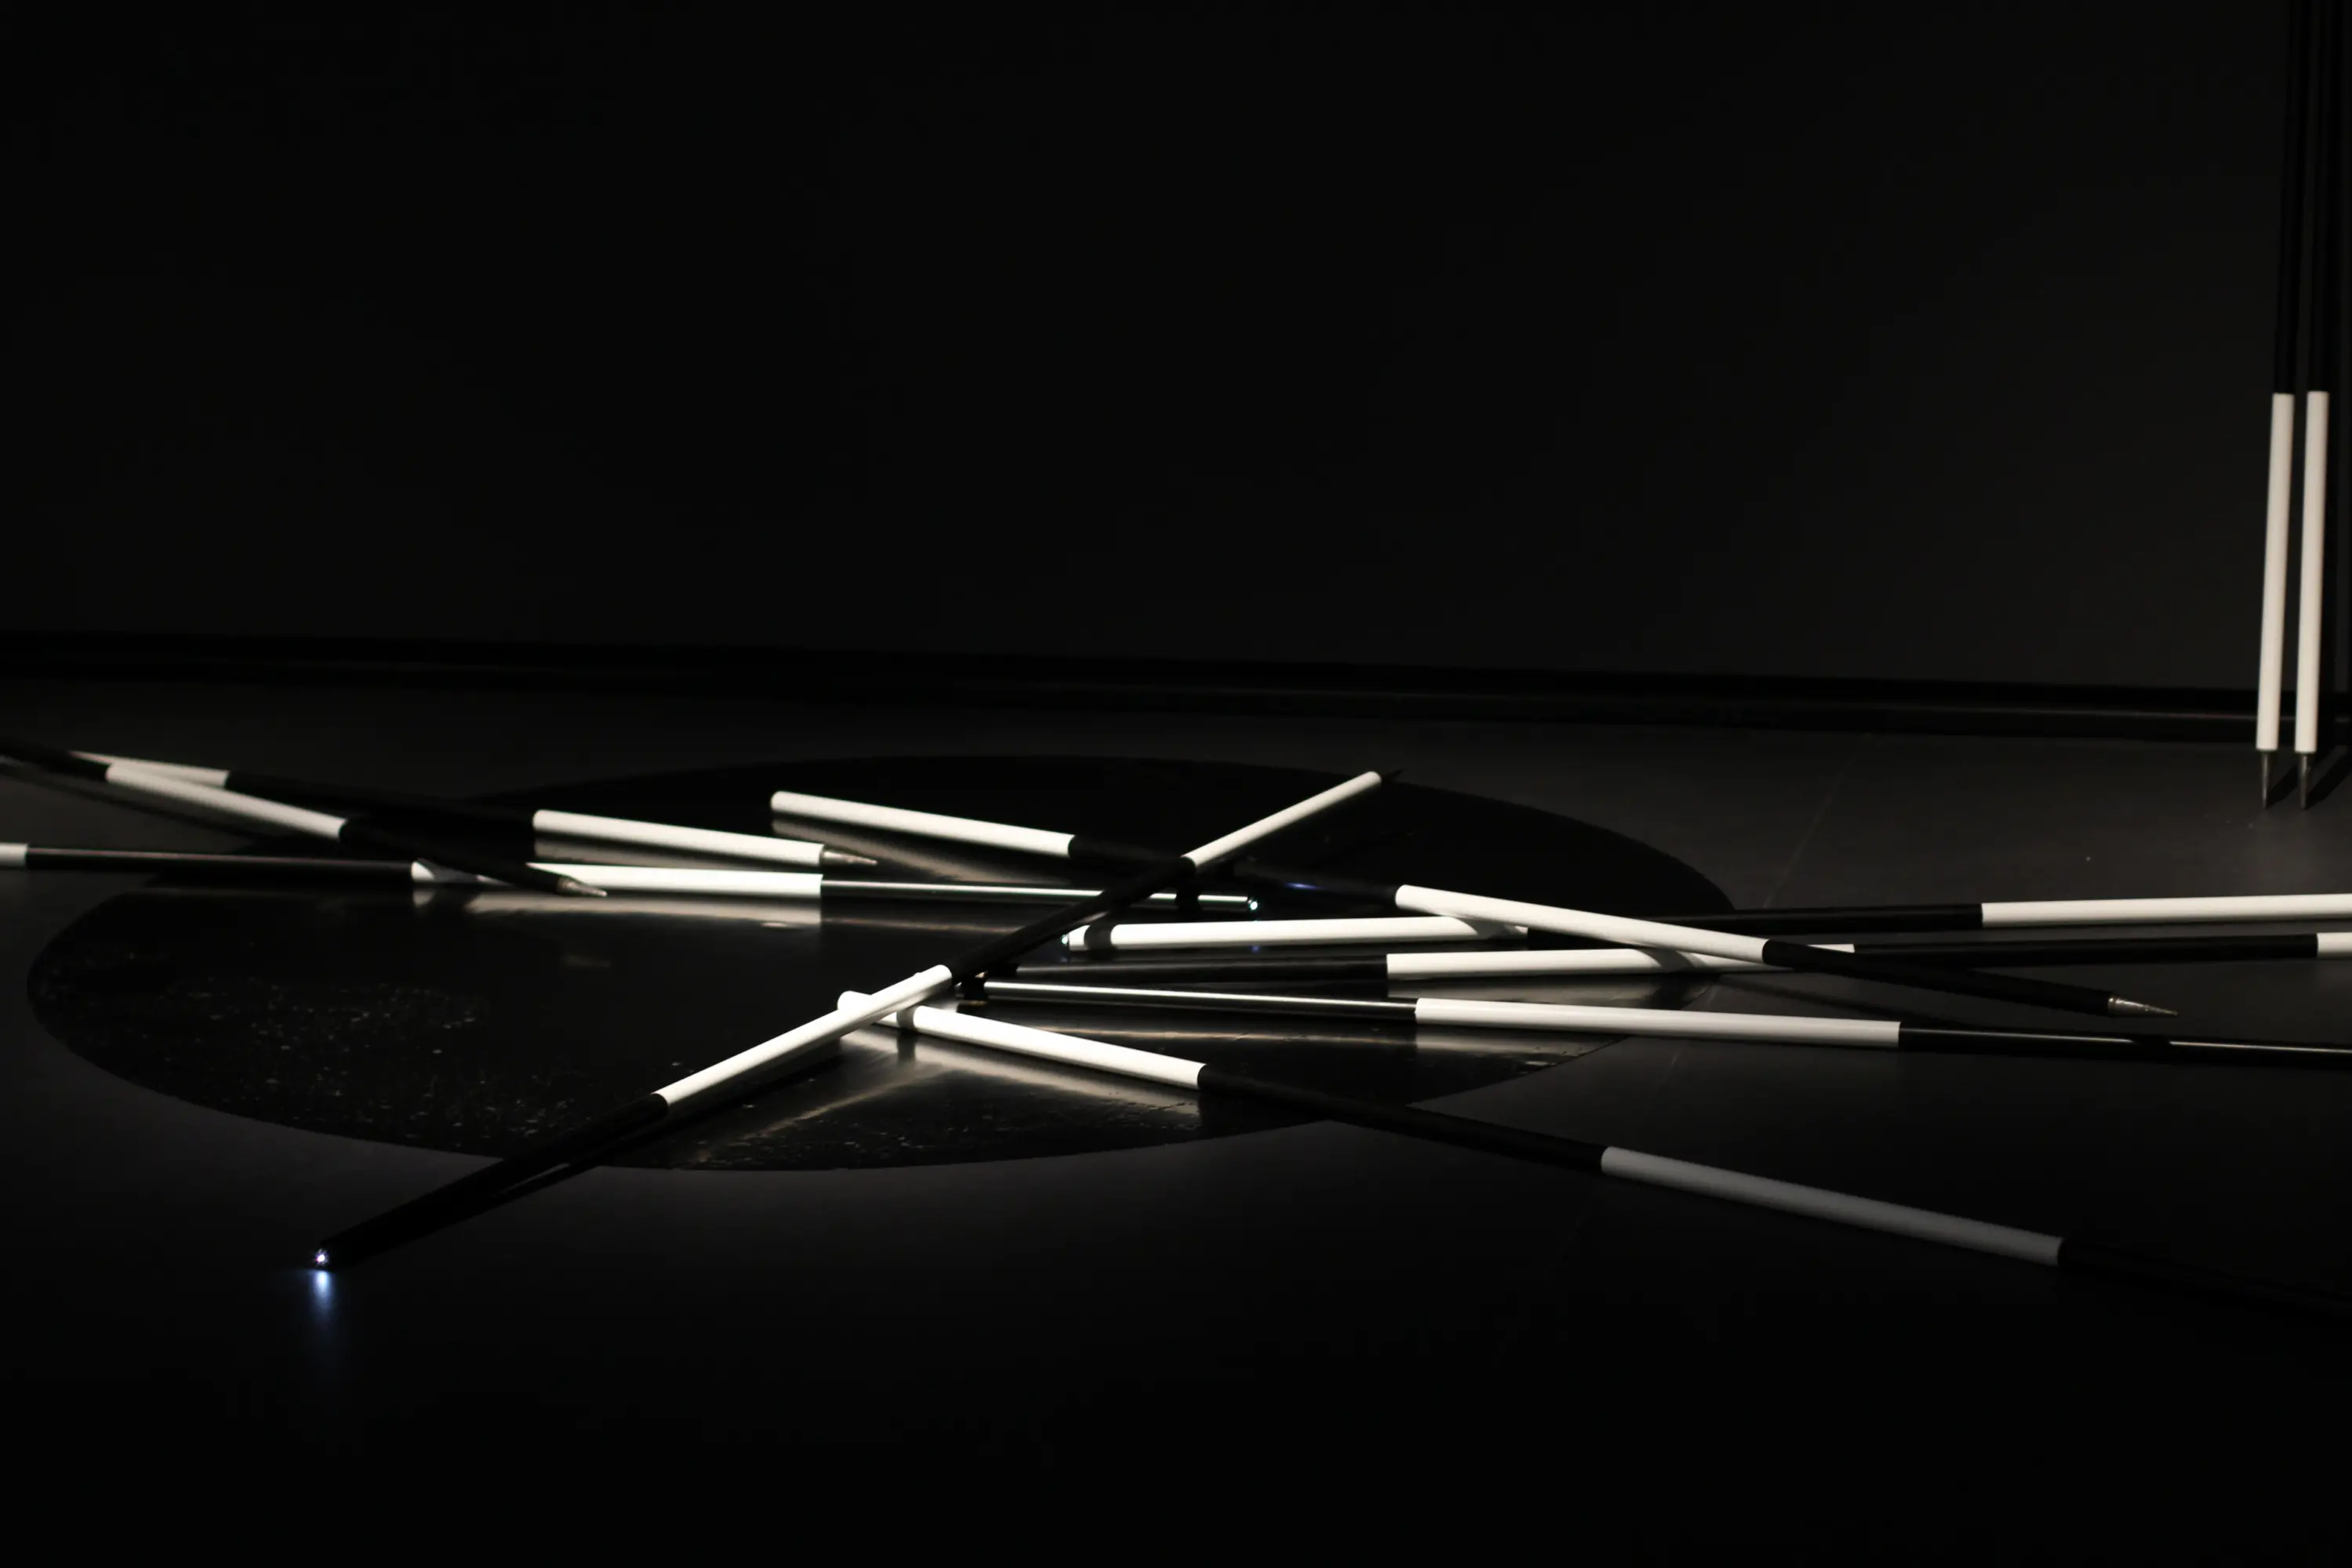 Black-and-white rods lay haphazardly over a black latex circle on the floor of a dark-lit gallery.